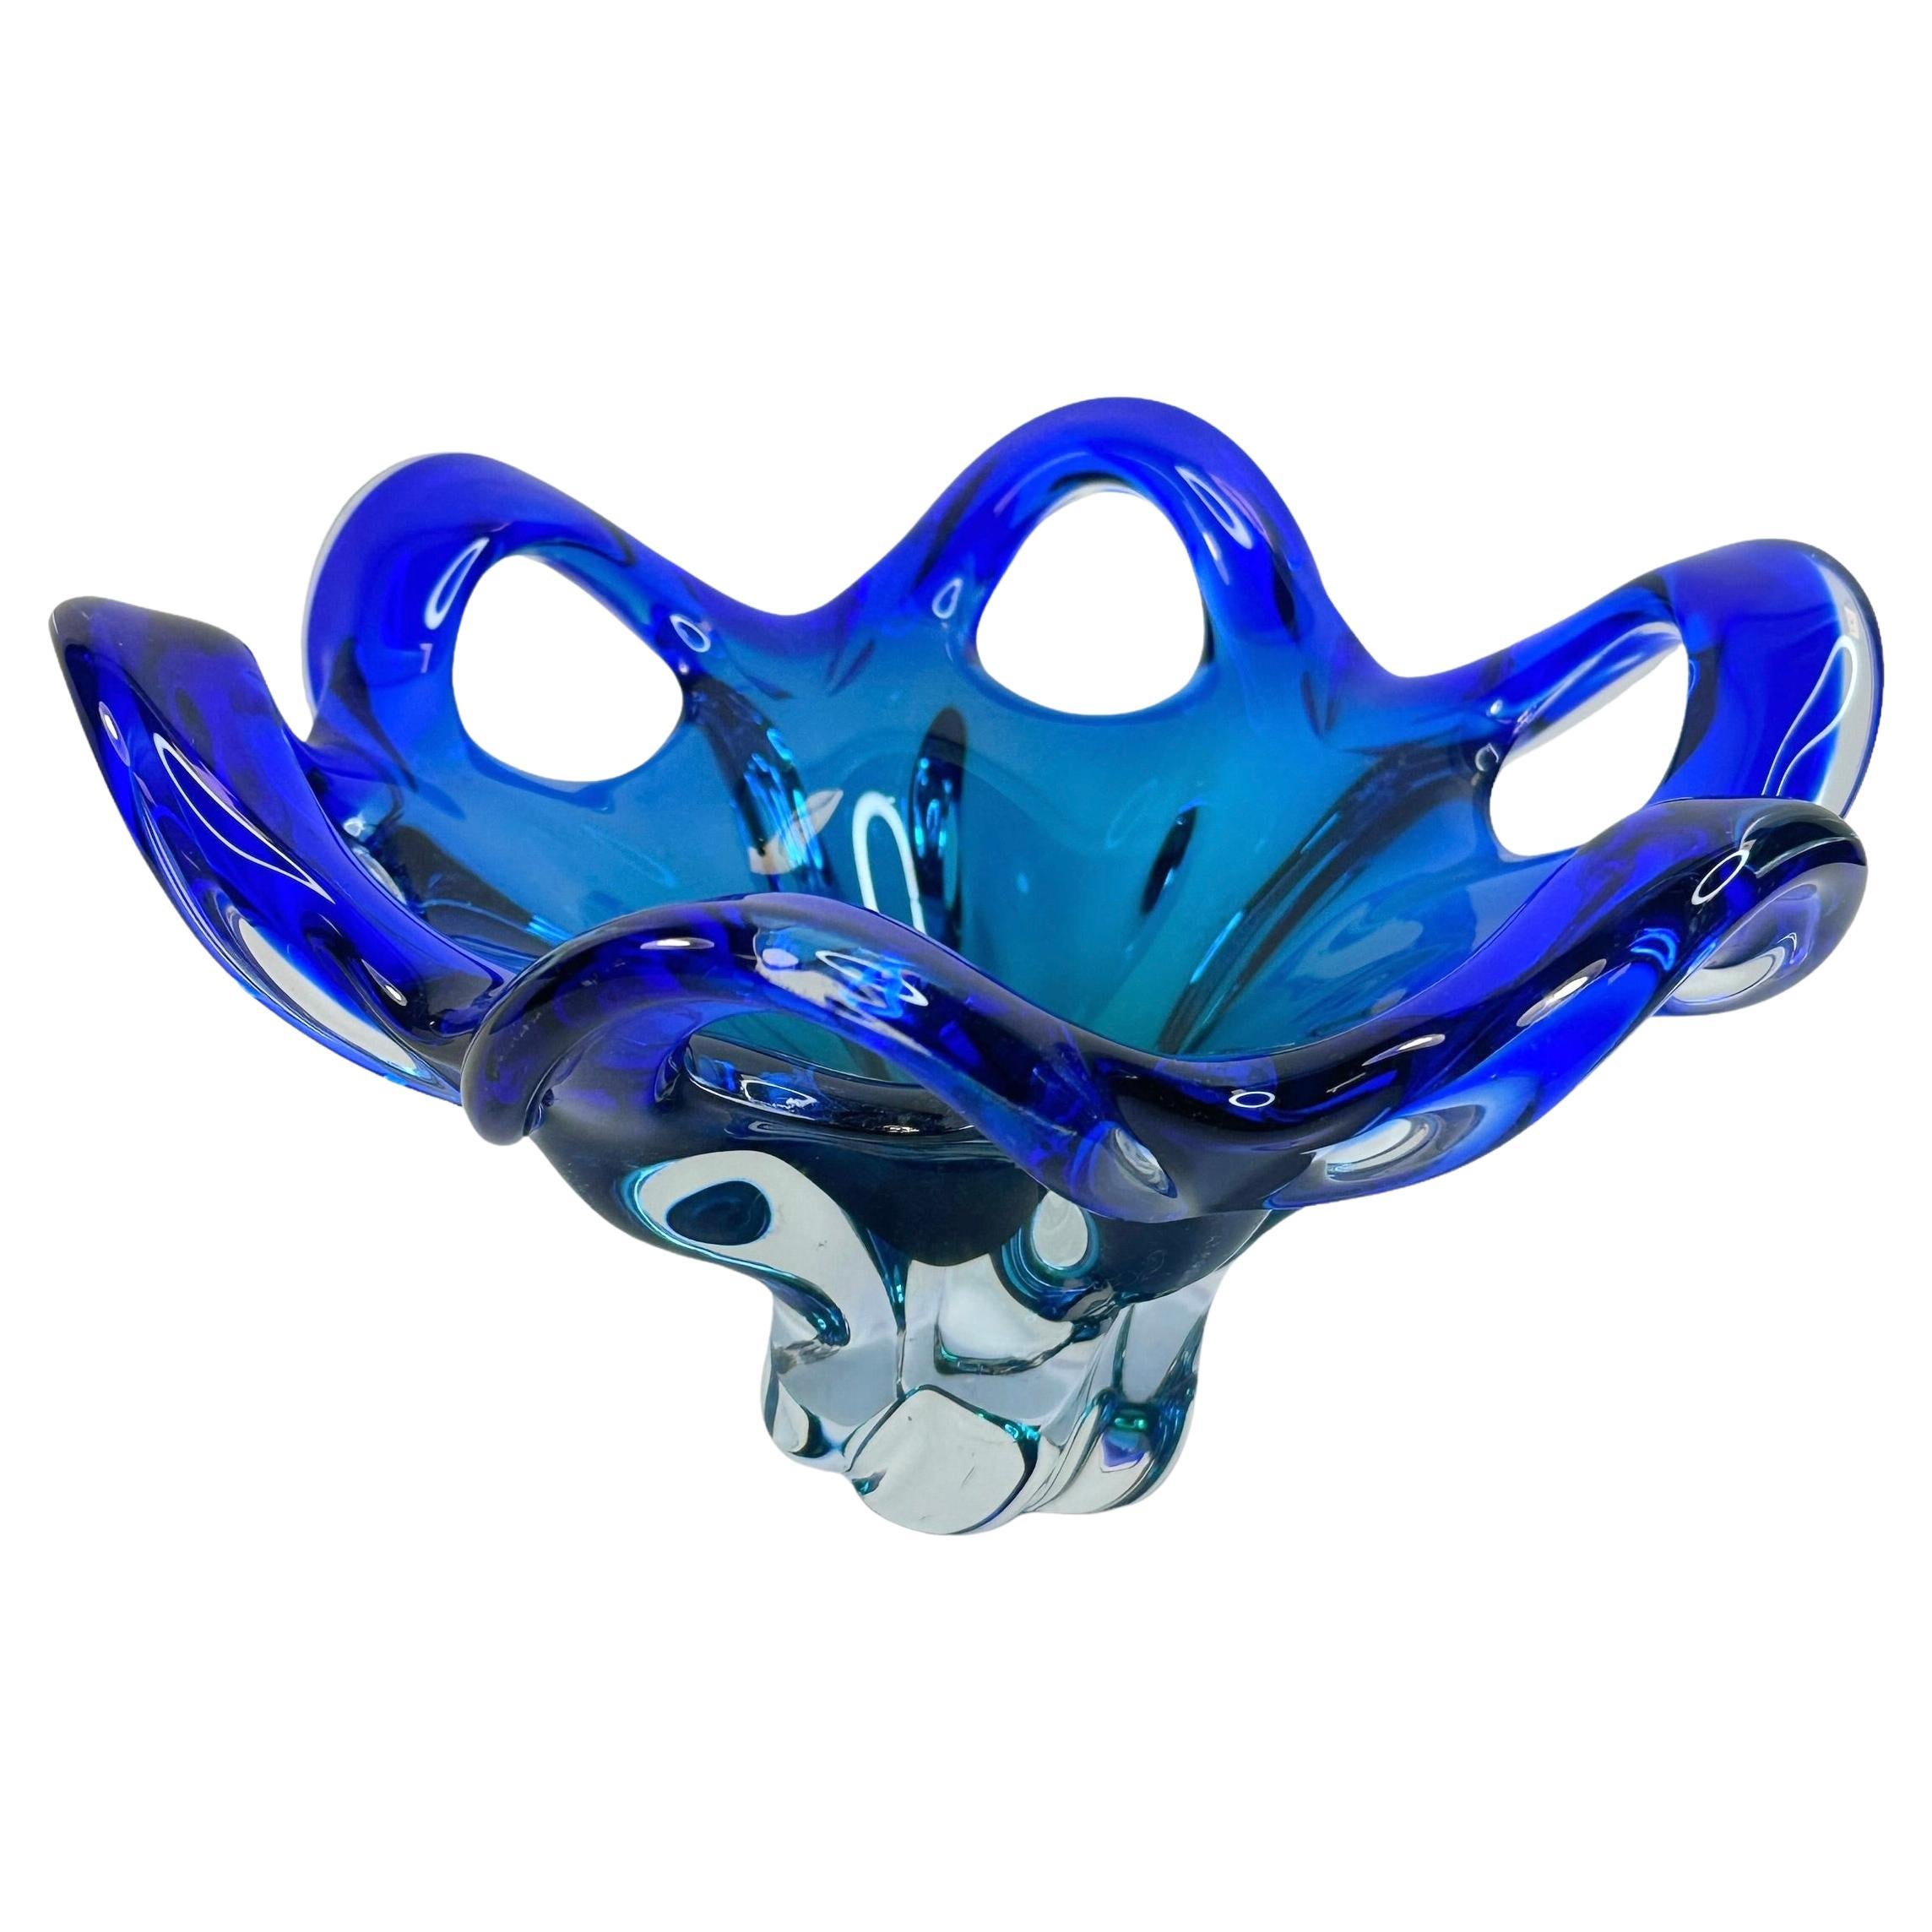 Stunning Murano Art Glass Bowl Catchall Blue and Clear, Vintage, Italy, 1970s For Sale